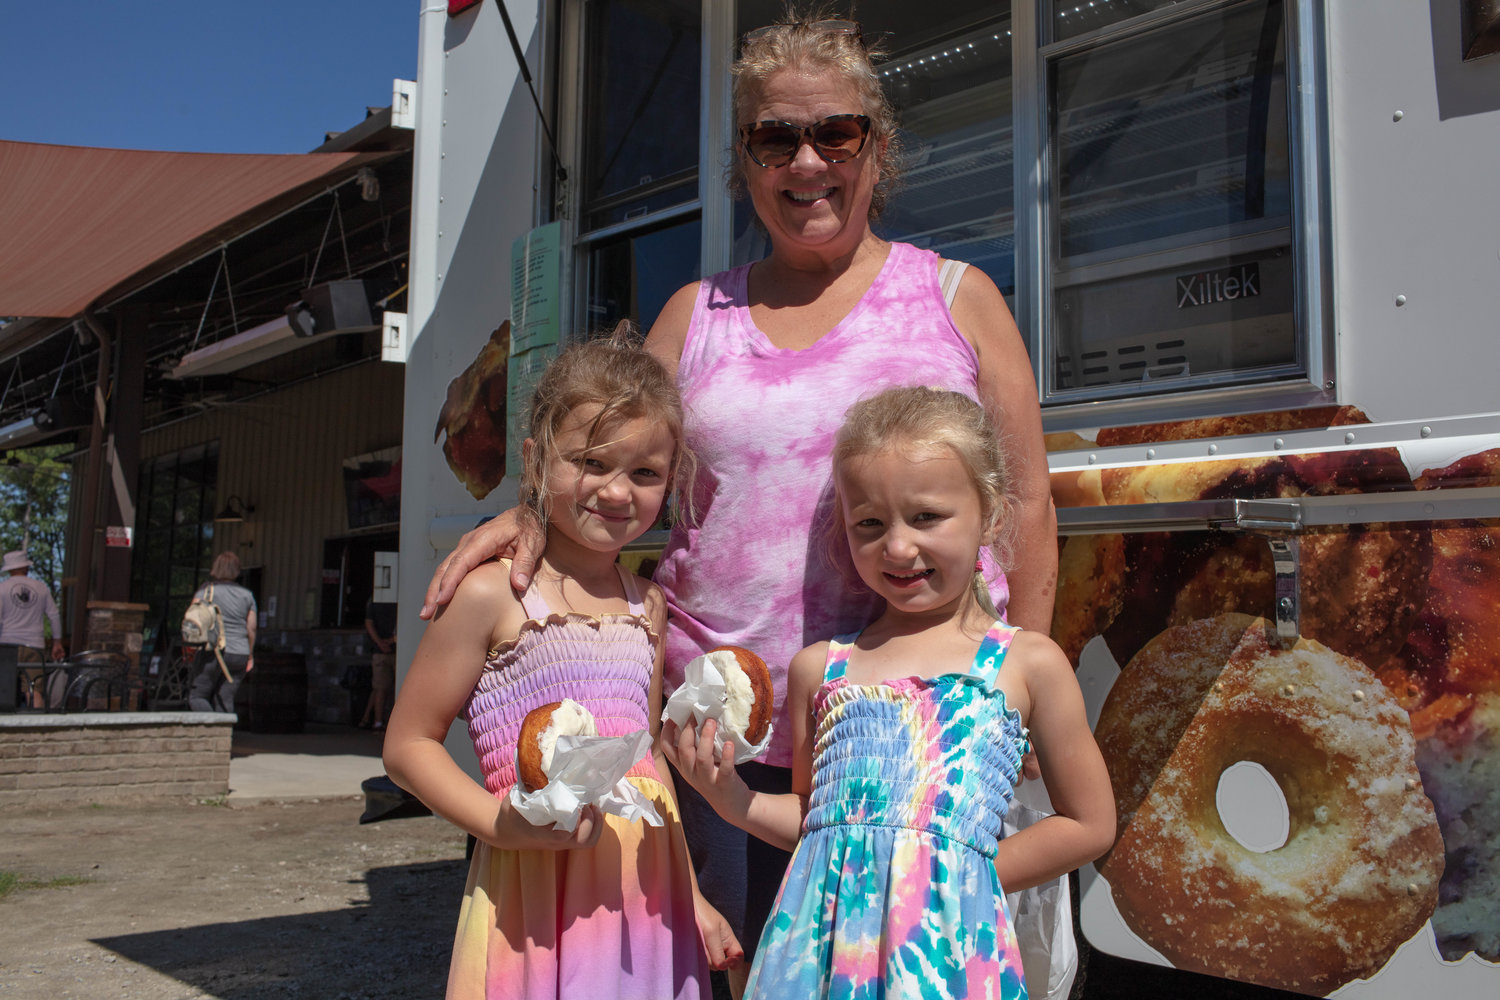 Olivia and Mckenzie Regan stopped by the dessert truck Dolores' Crumble Crust Pies for some donuts with their grandmother Liz Crosland.